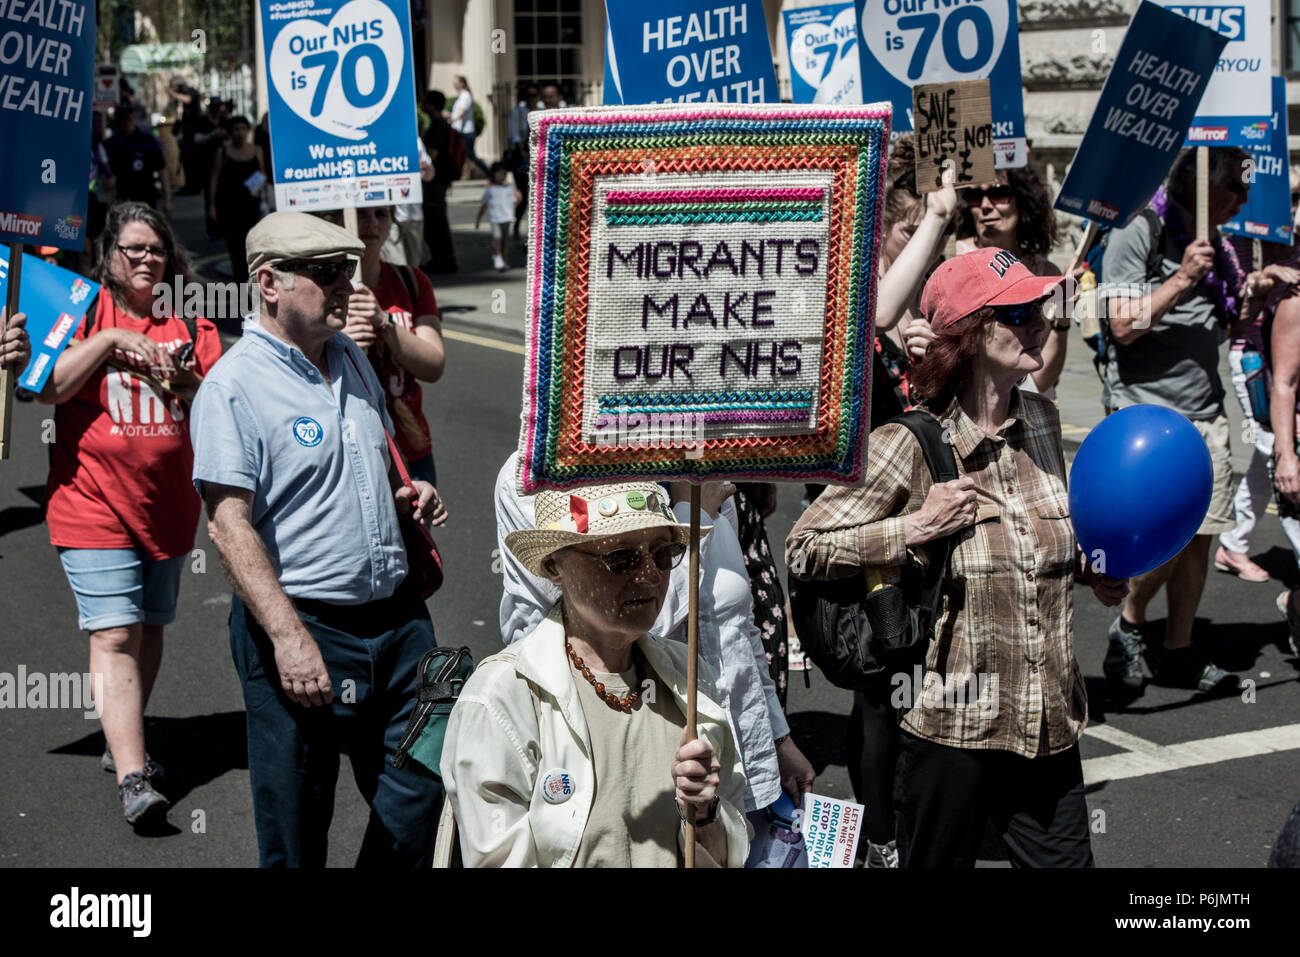 An old woman is seen carrying a poster during the demonstration. Tens of thousands of people marched during the hot Saturday weather through London to celebrate and demonstrate over Britain's National Health Service (NHS), ahead of its 70th birthday next week. Stock Photo